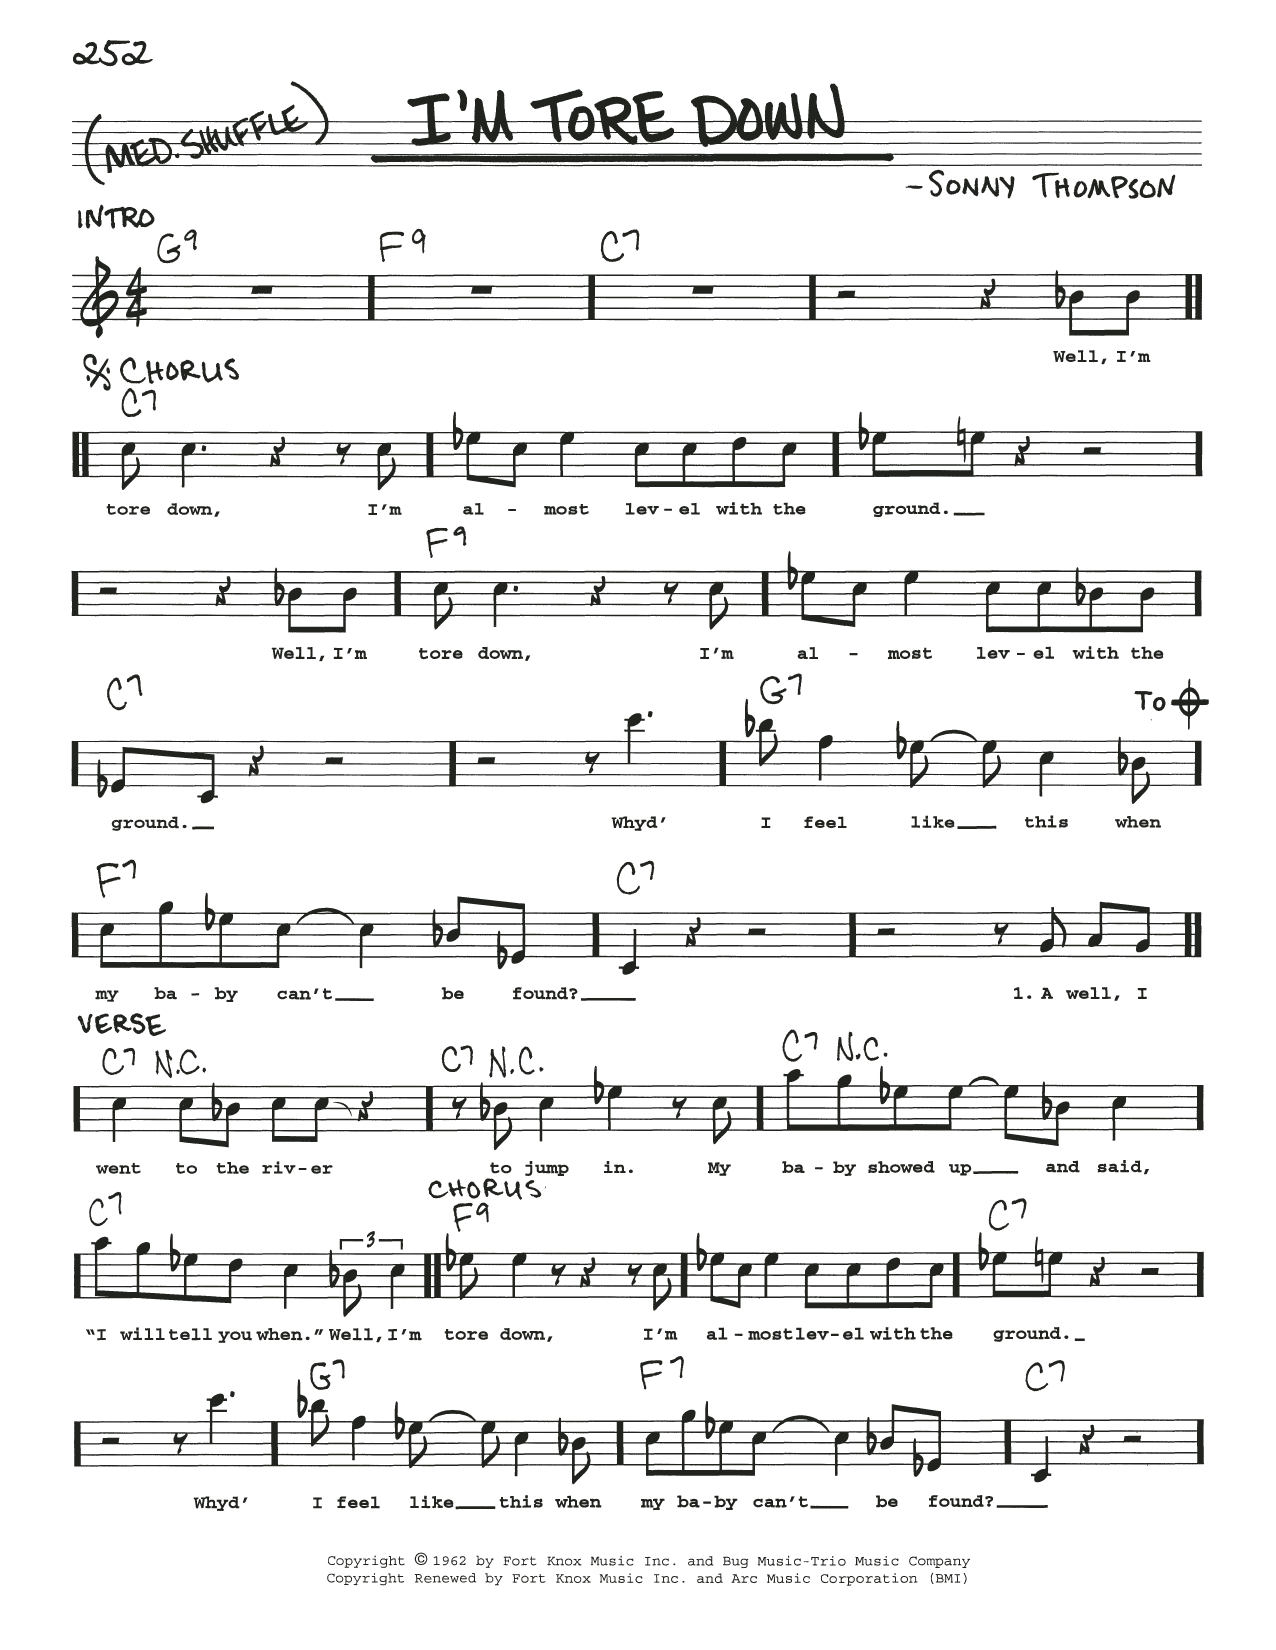 Download Sonny Thompson I'm Tore Down Sheet Music